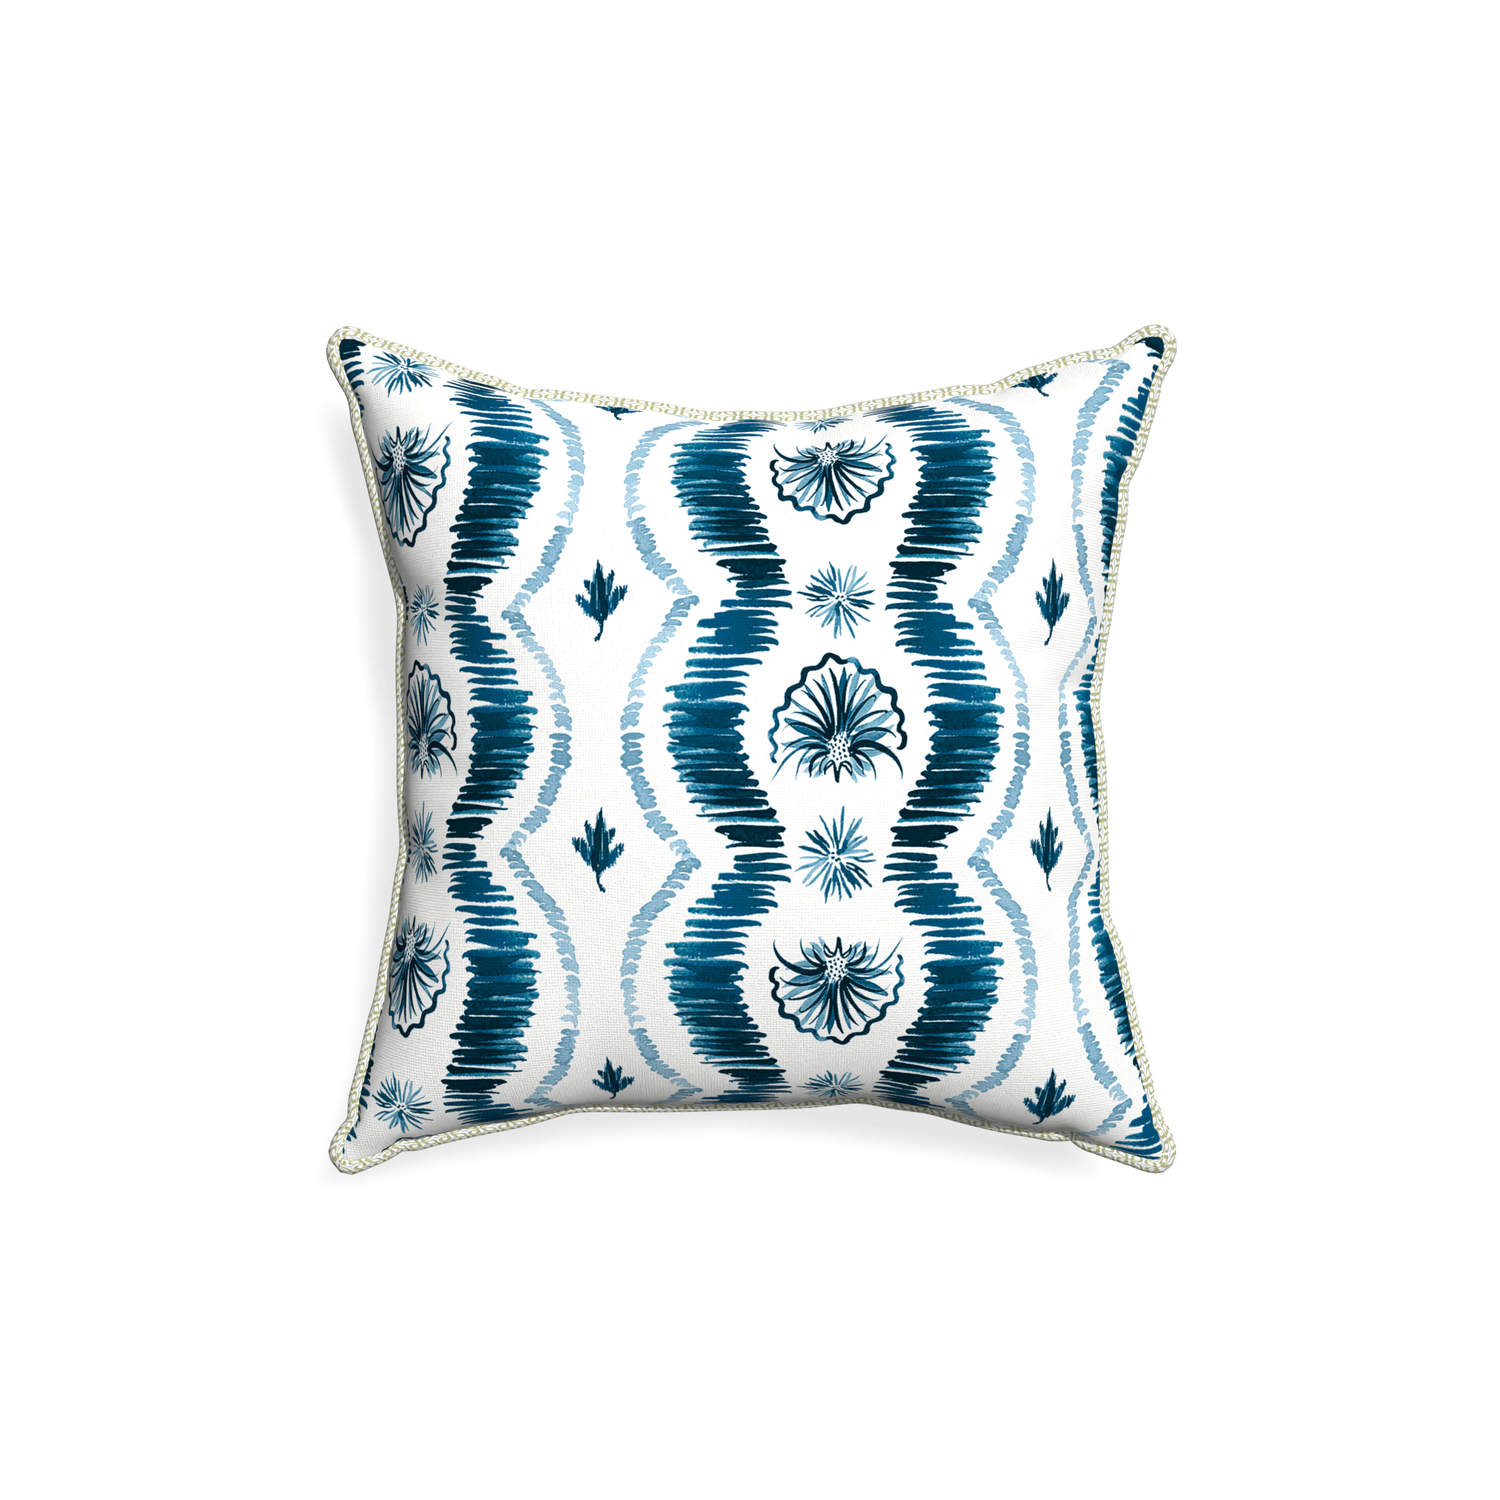 18-square alice custom blue ikatpillow with l piping on white background